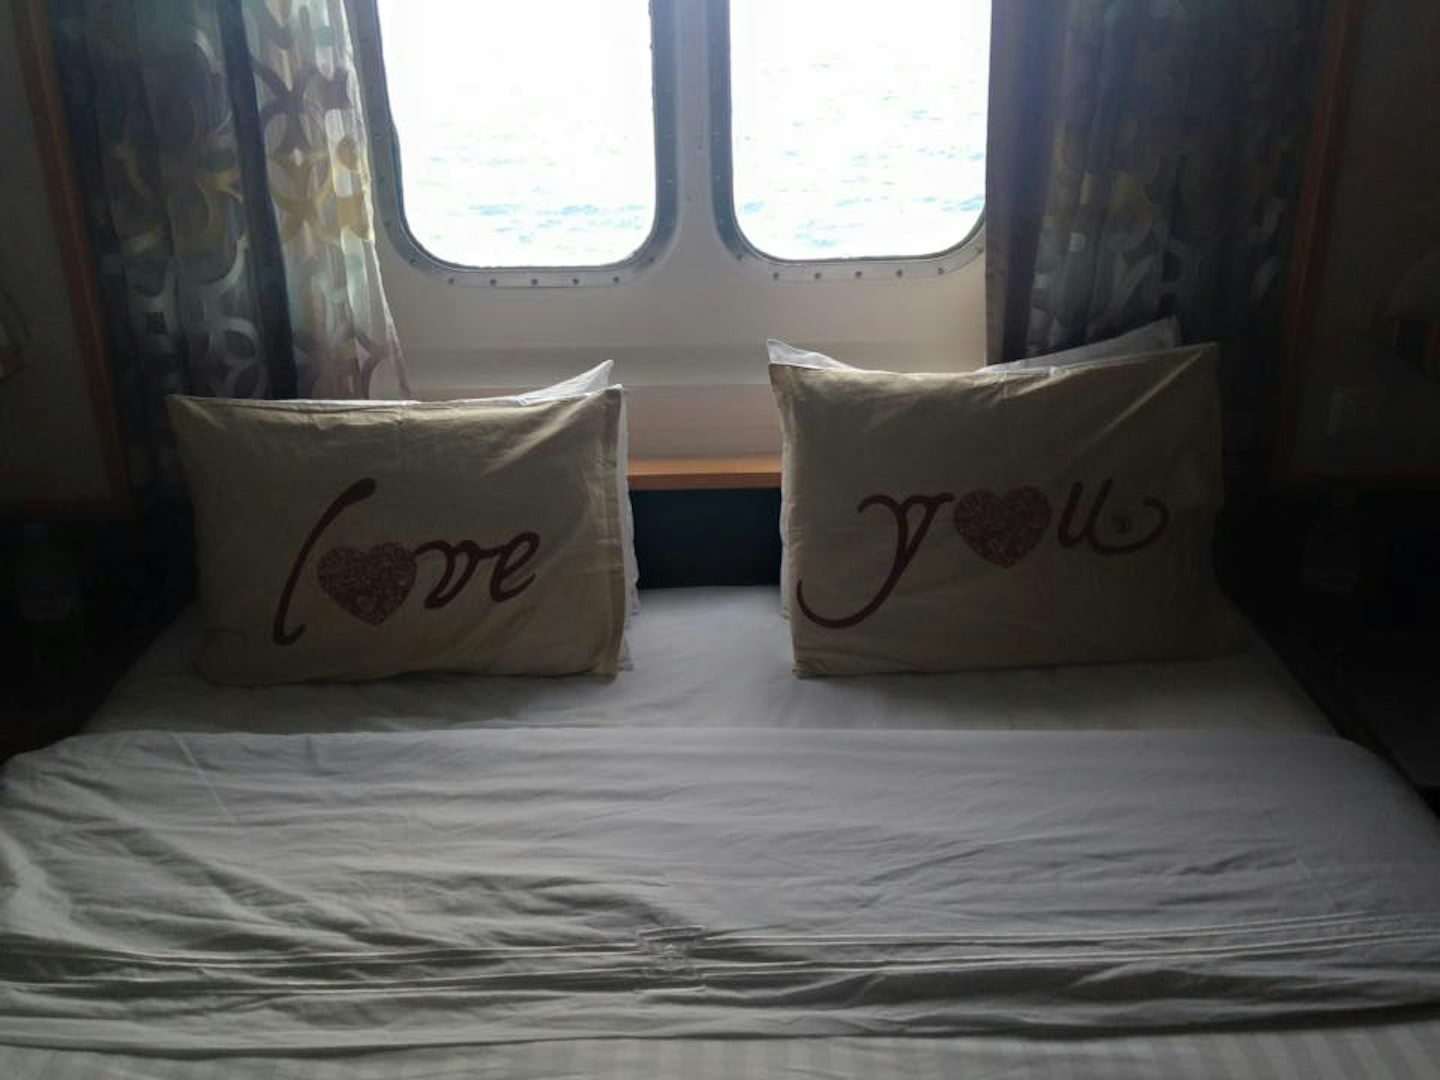 pillow cases included with the Anniversary stateroom decoration package.